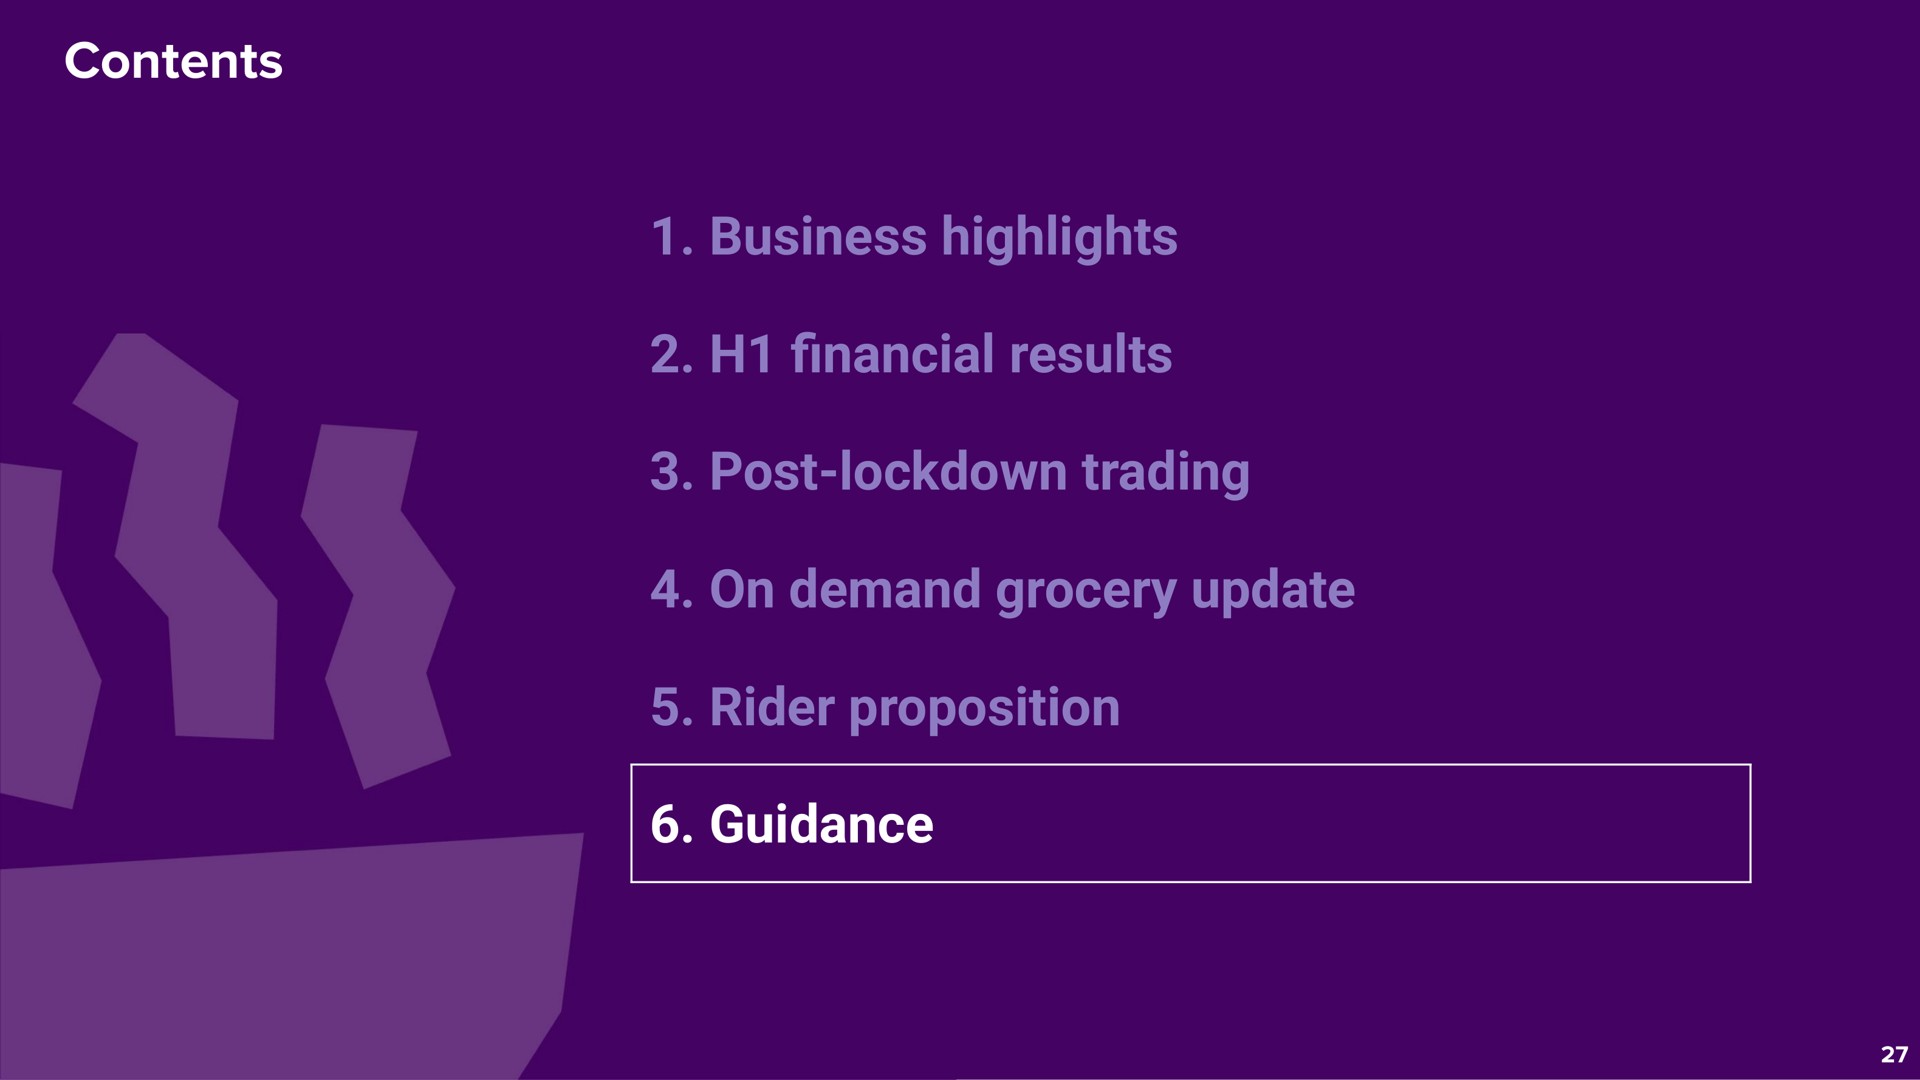 contents business highlights results post trading on demand grocery update rider proposition guidance yam wee | Deliveroo